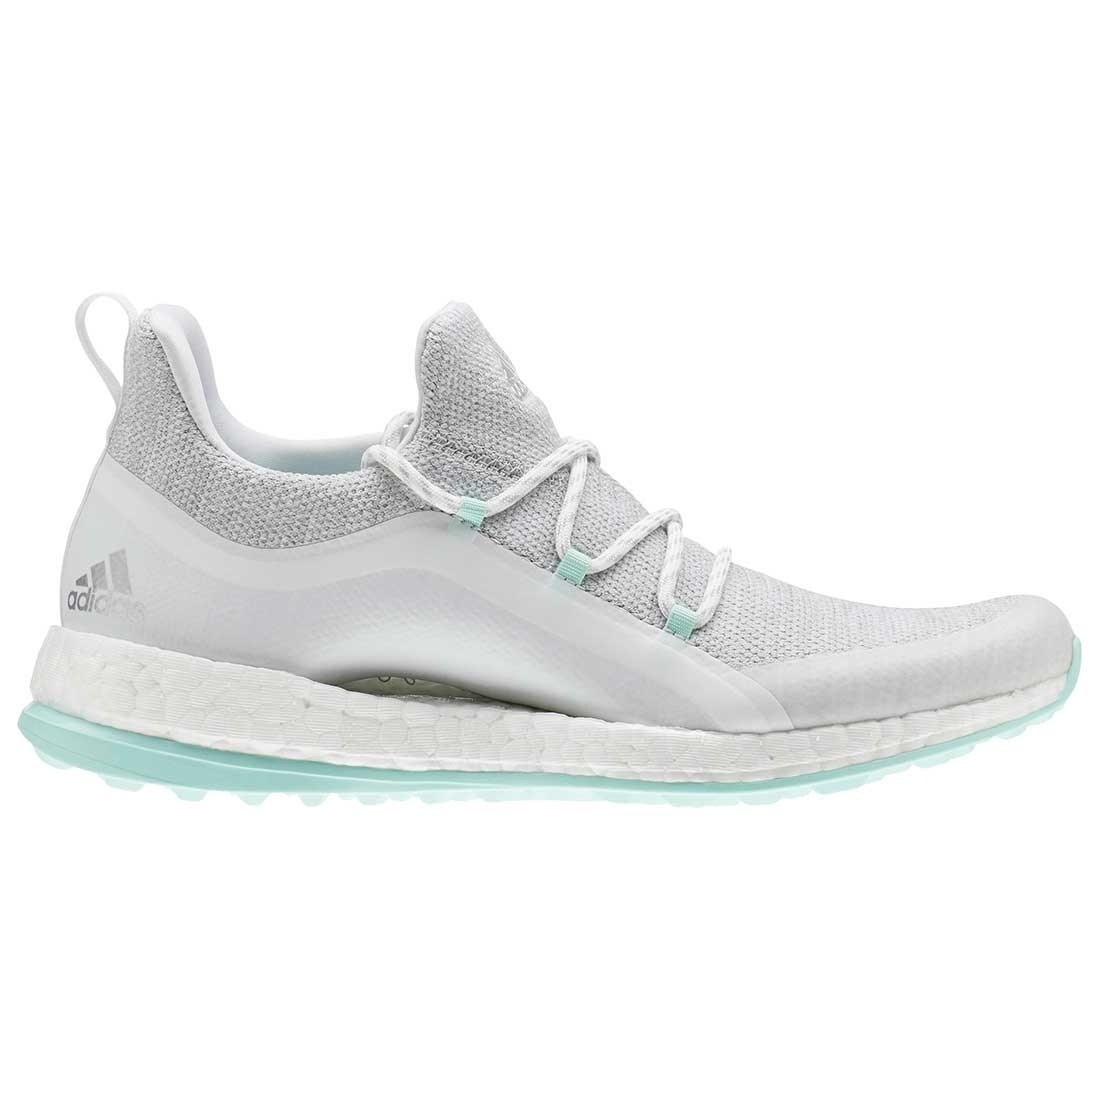 adidas pure boost golf shoes online -